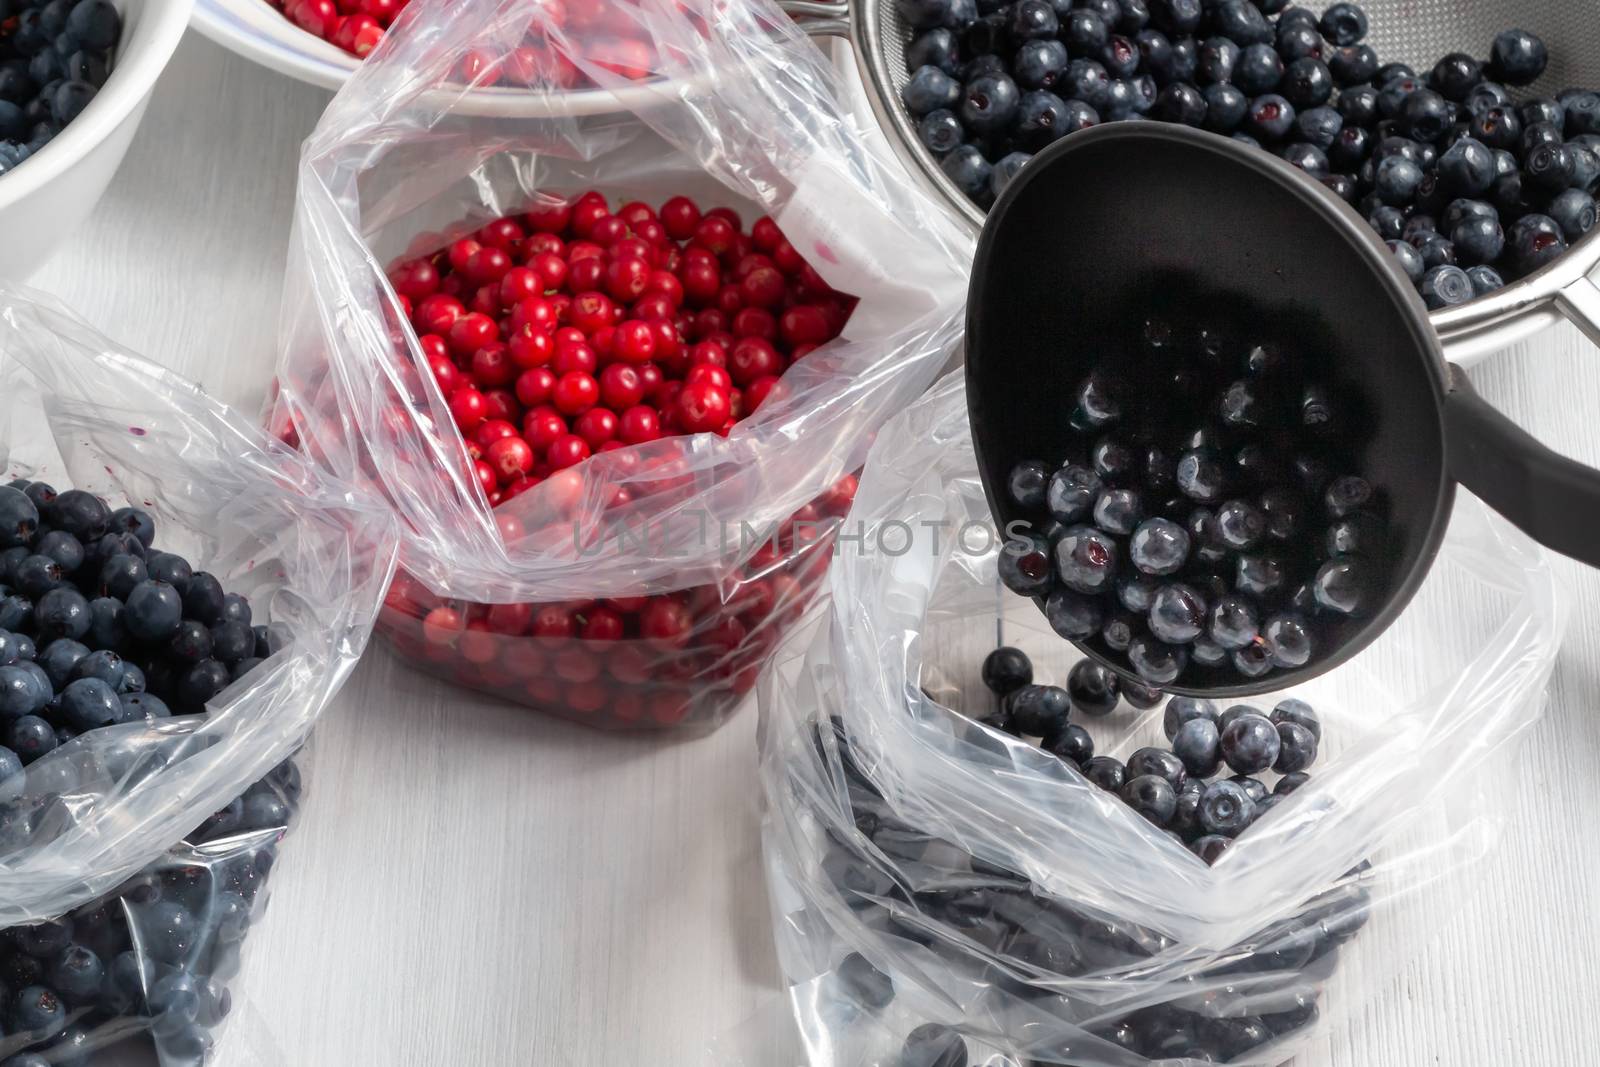 Process of preparing berries for freezing - folding into packages.